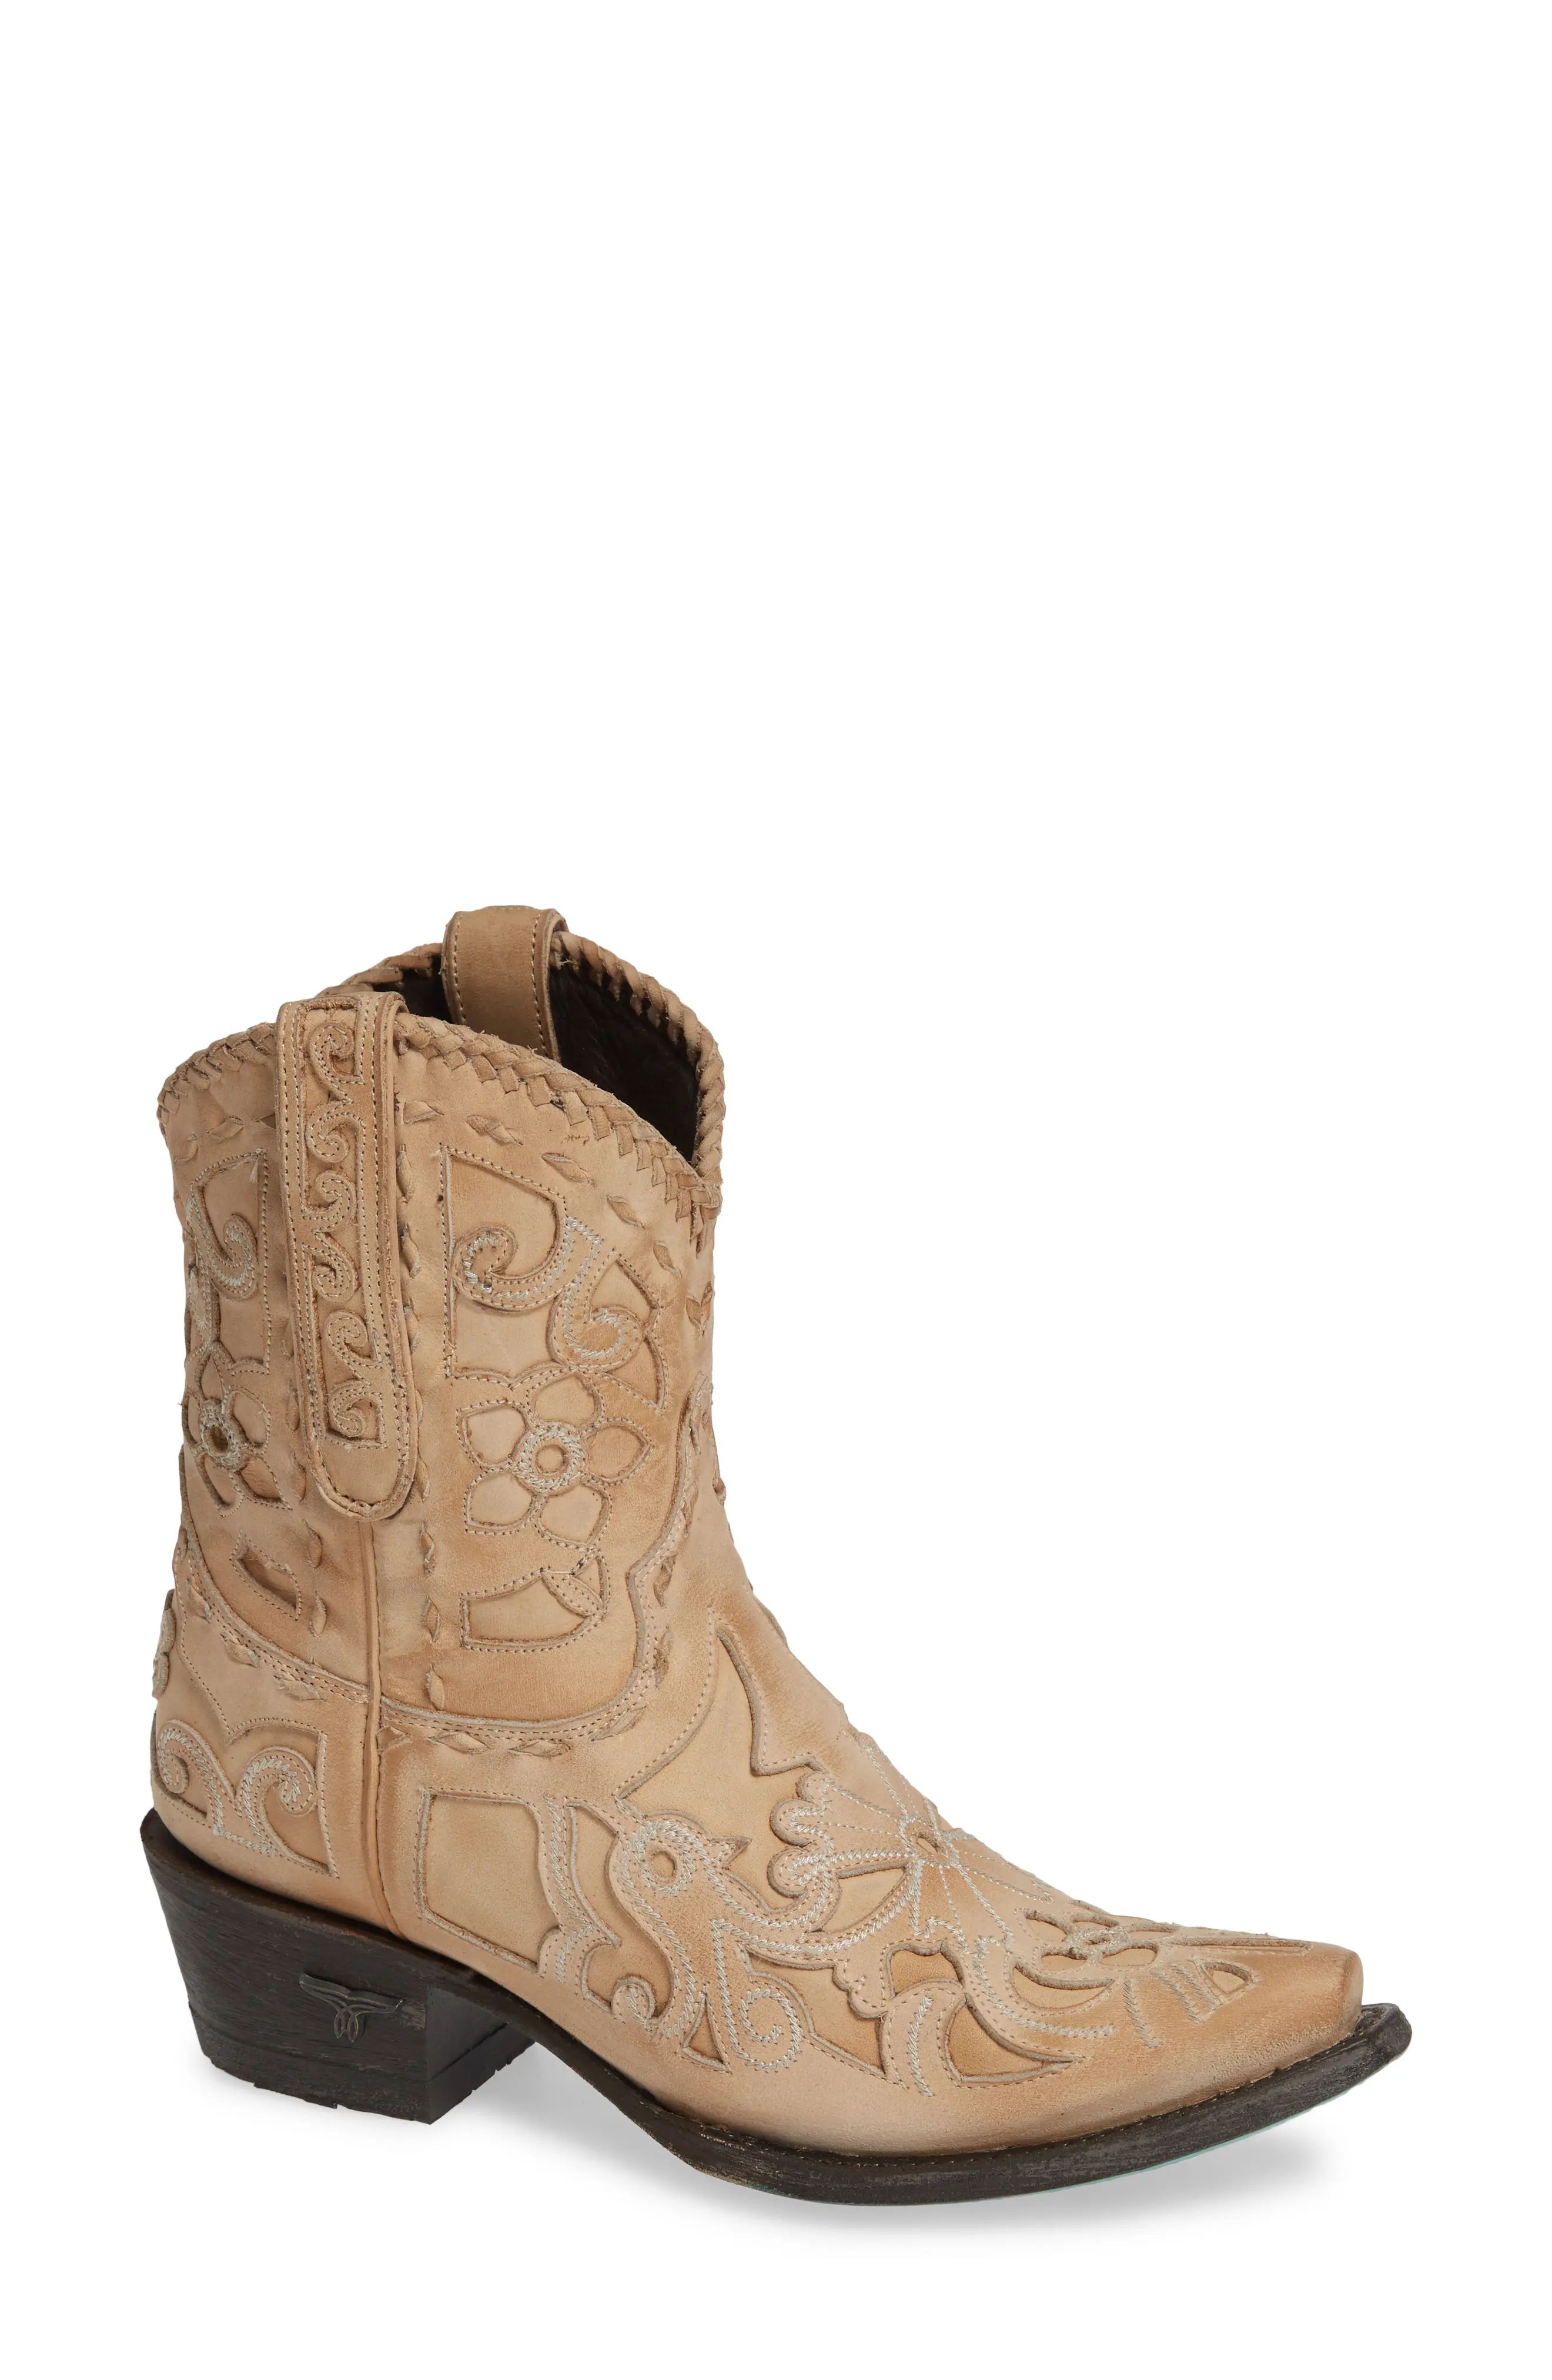 Lane Boots Robin Western Boot, Size 7.5 in Bone Leather at Nordstrom | Nordstrom